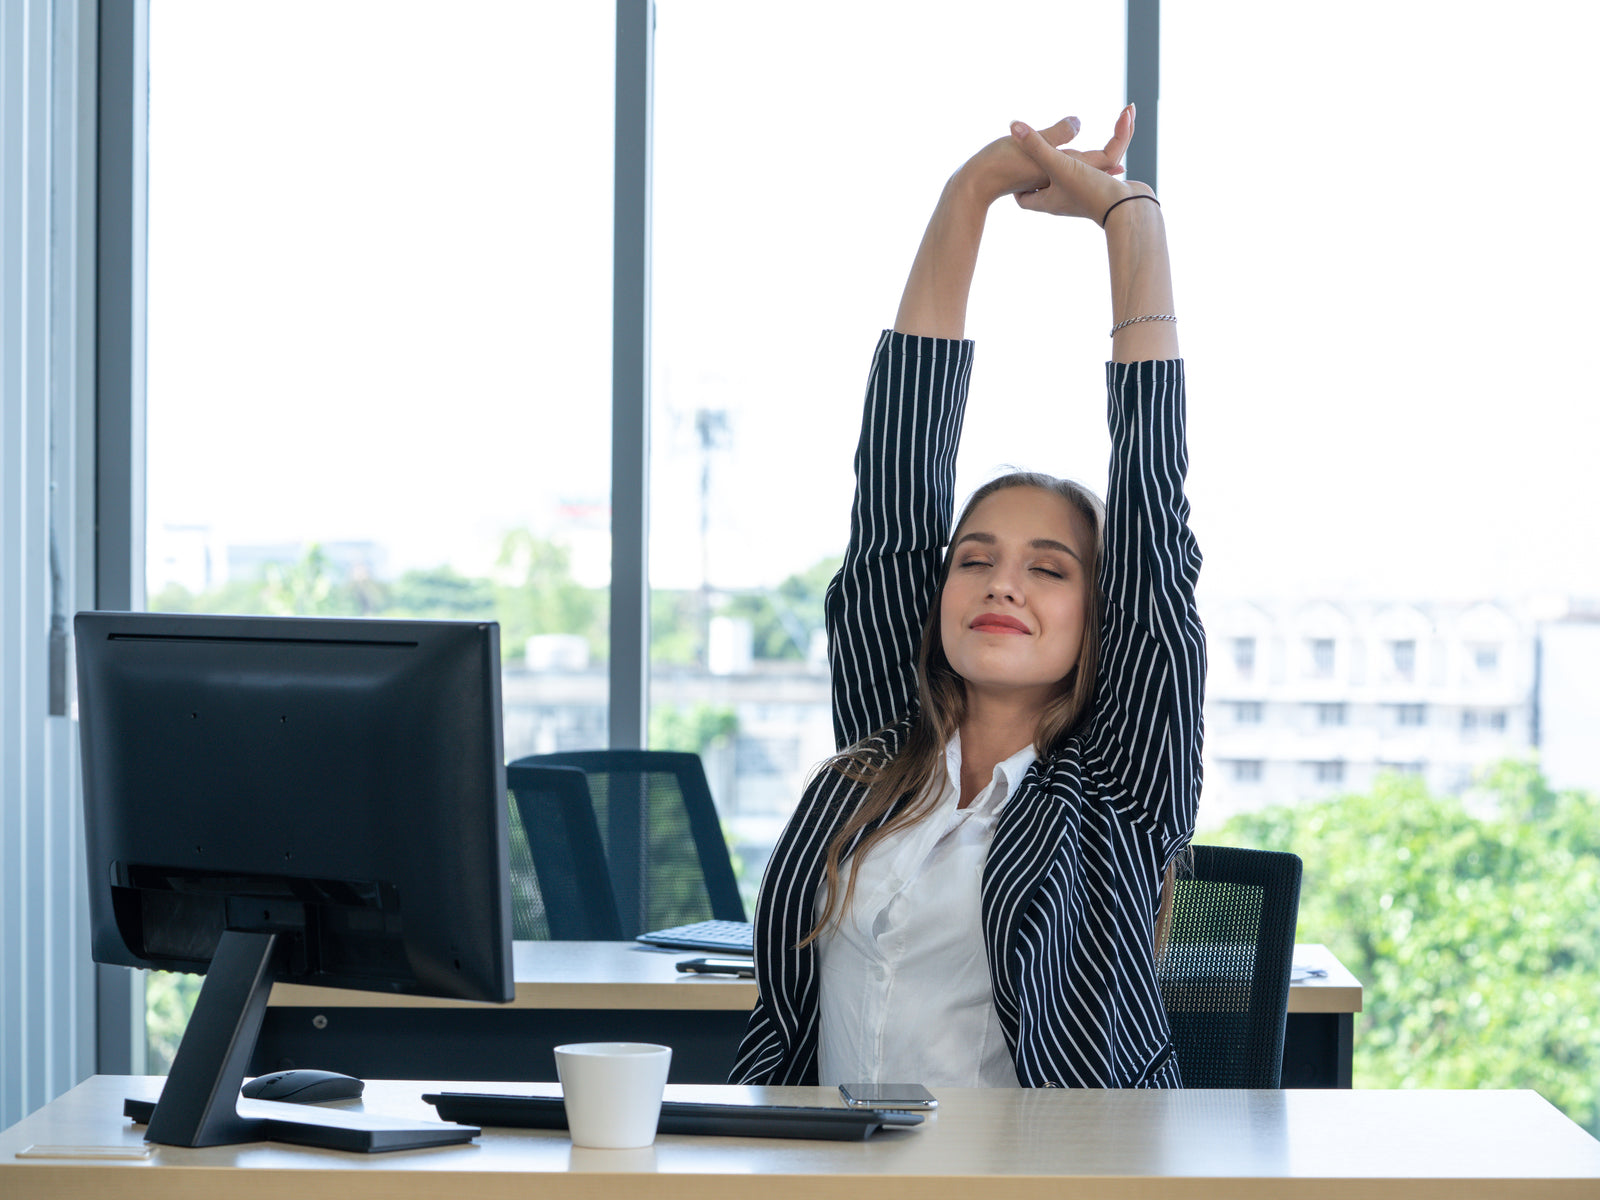 5 Exercises to Do in Your Office That'll Leave You Feeling Fit